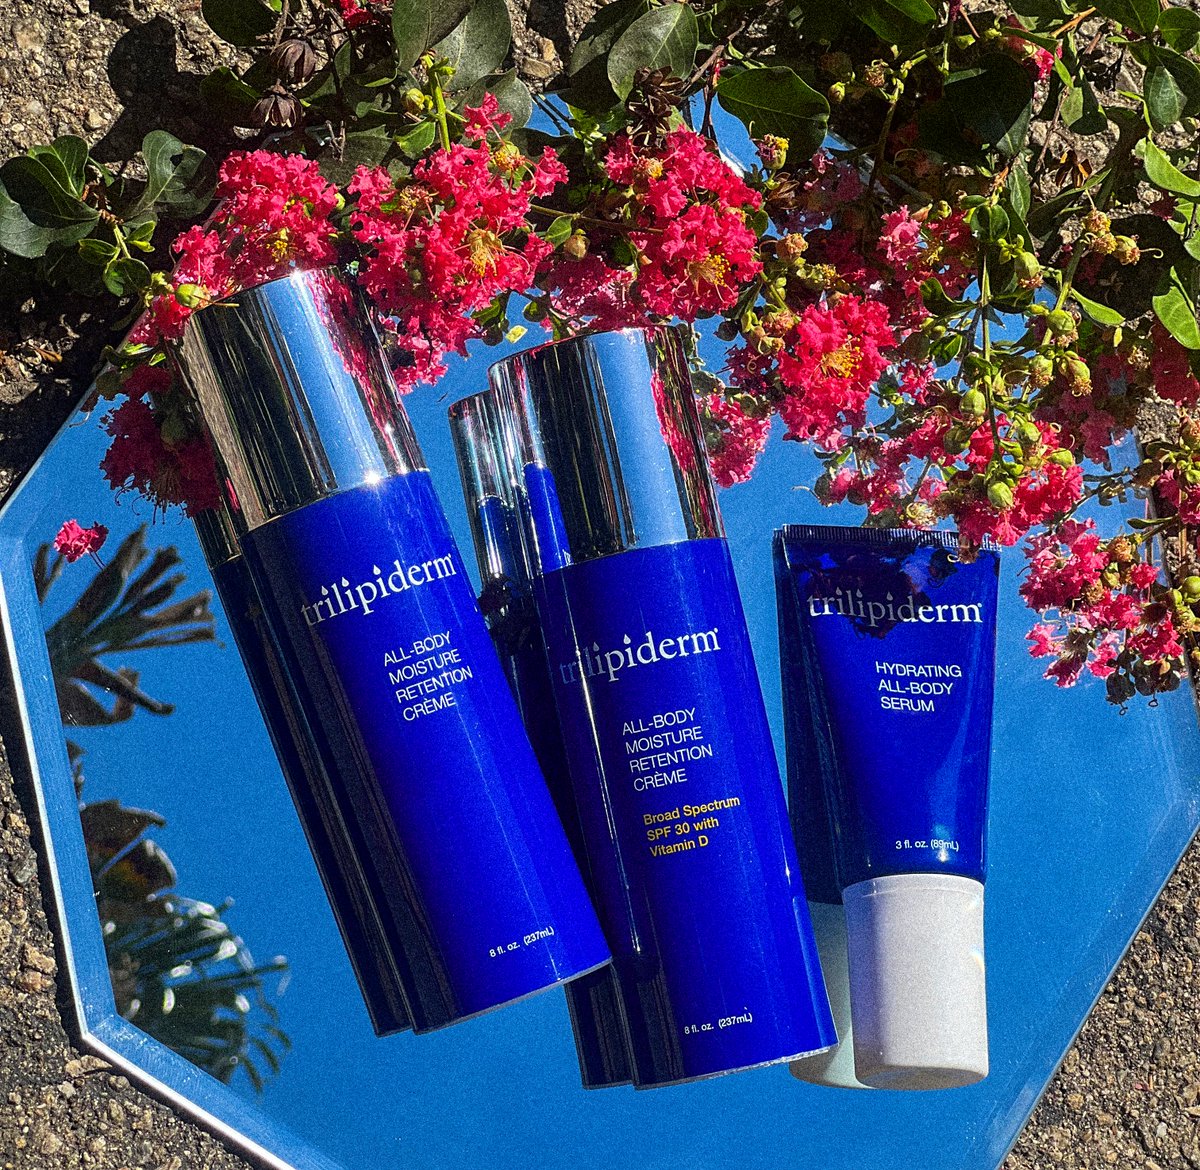 LAST CHANCE to win over $300 in free product! Our Essential Face & Body Giveaway ends tomorrow, 8/31. Don't miss out - sign up at the link in bio!
#Trilipiderm #essentialskincare